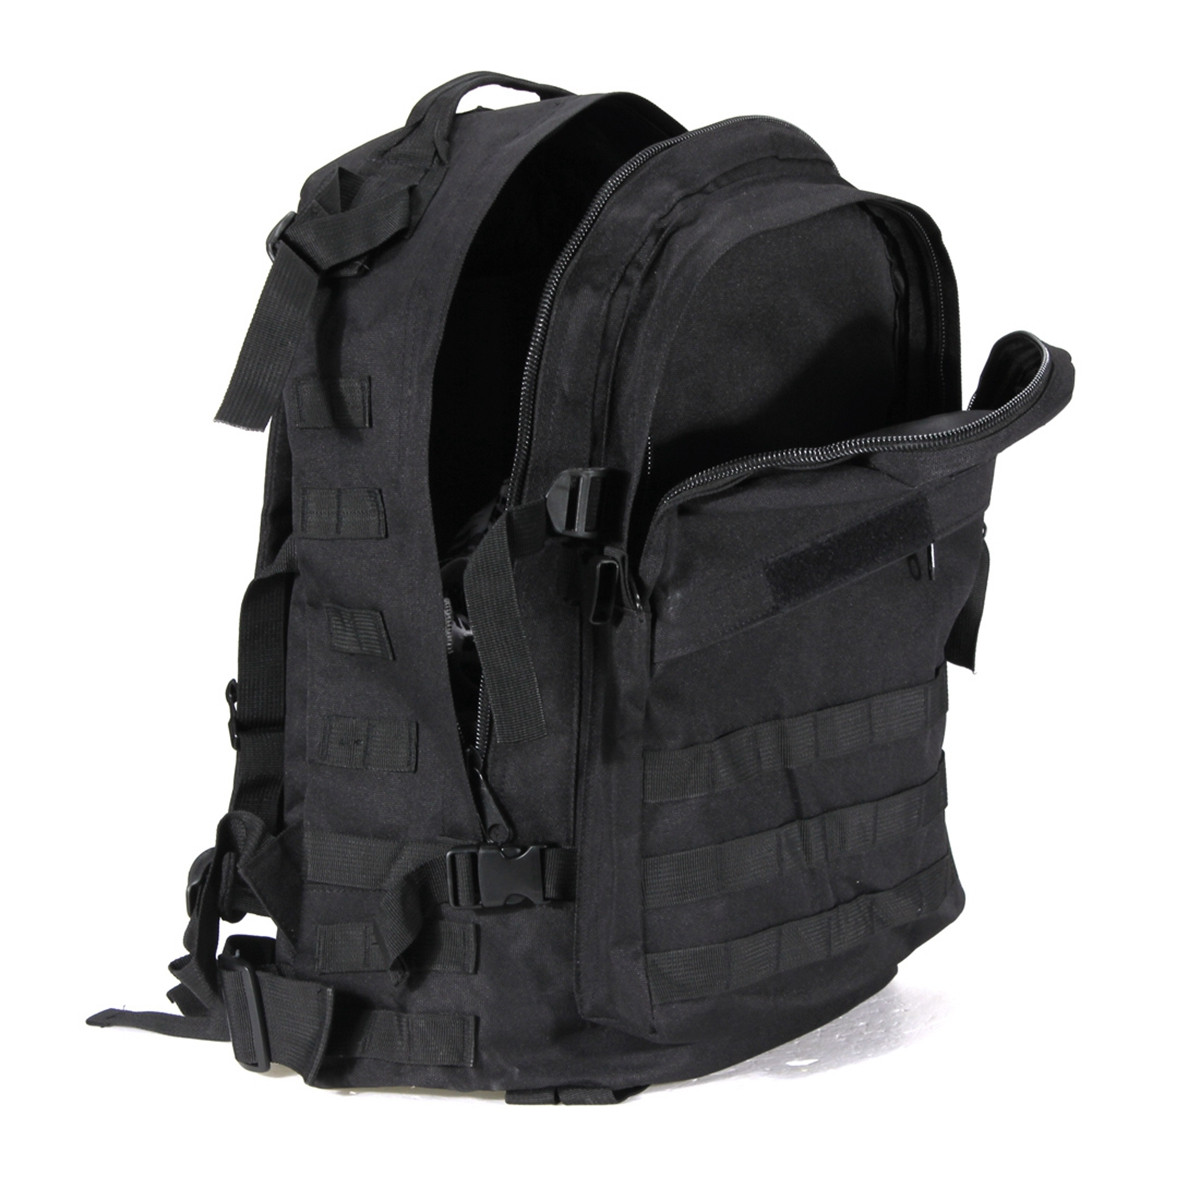 AMTOA-40L-3D-Outdoor-Molle-Military-Tactical-Rucksack-Backpack-Camping-Hiking-Bag-1817259-4